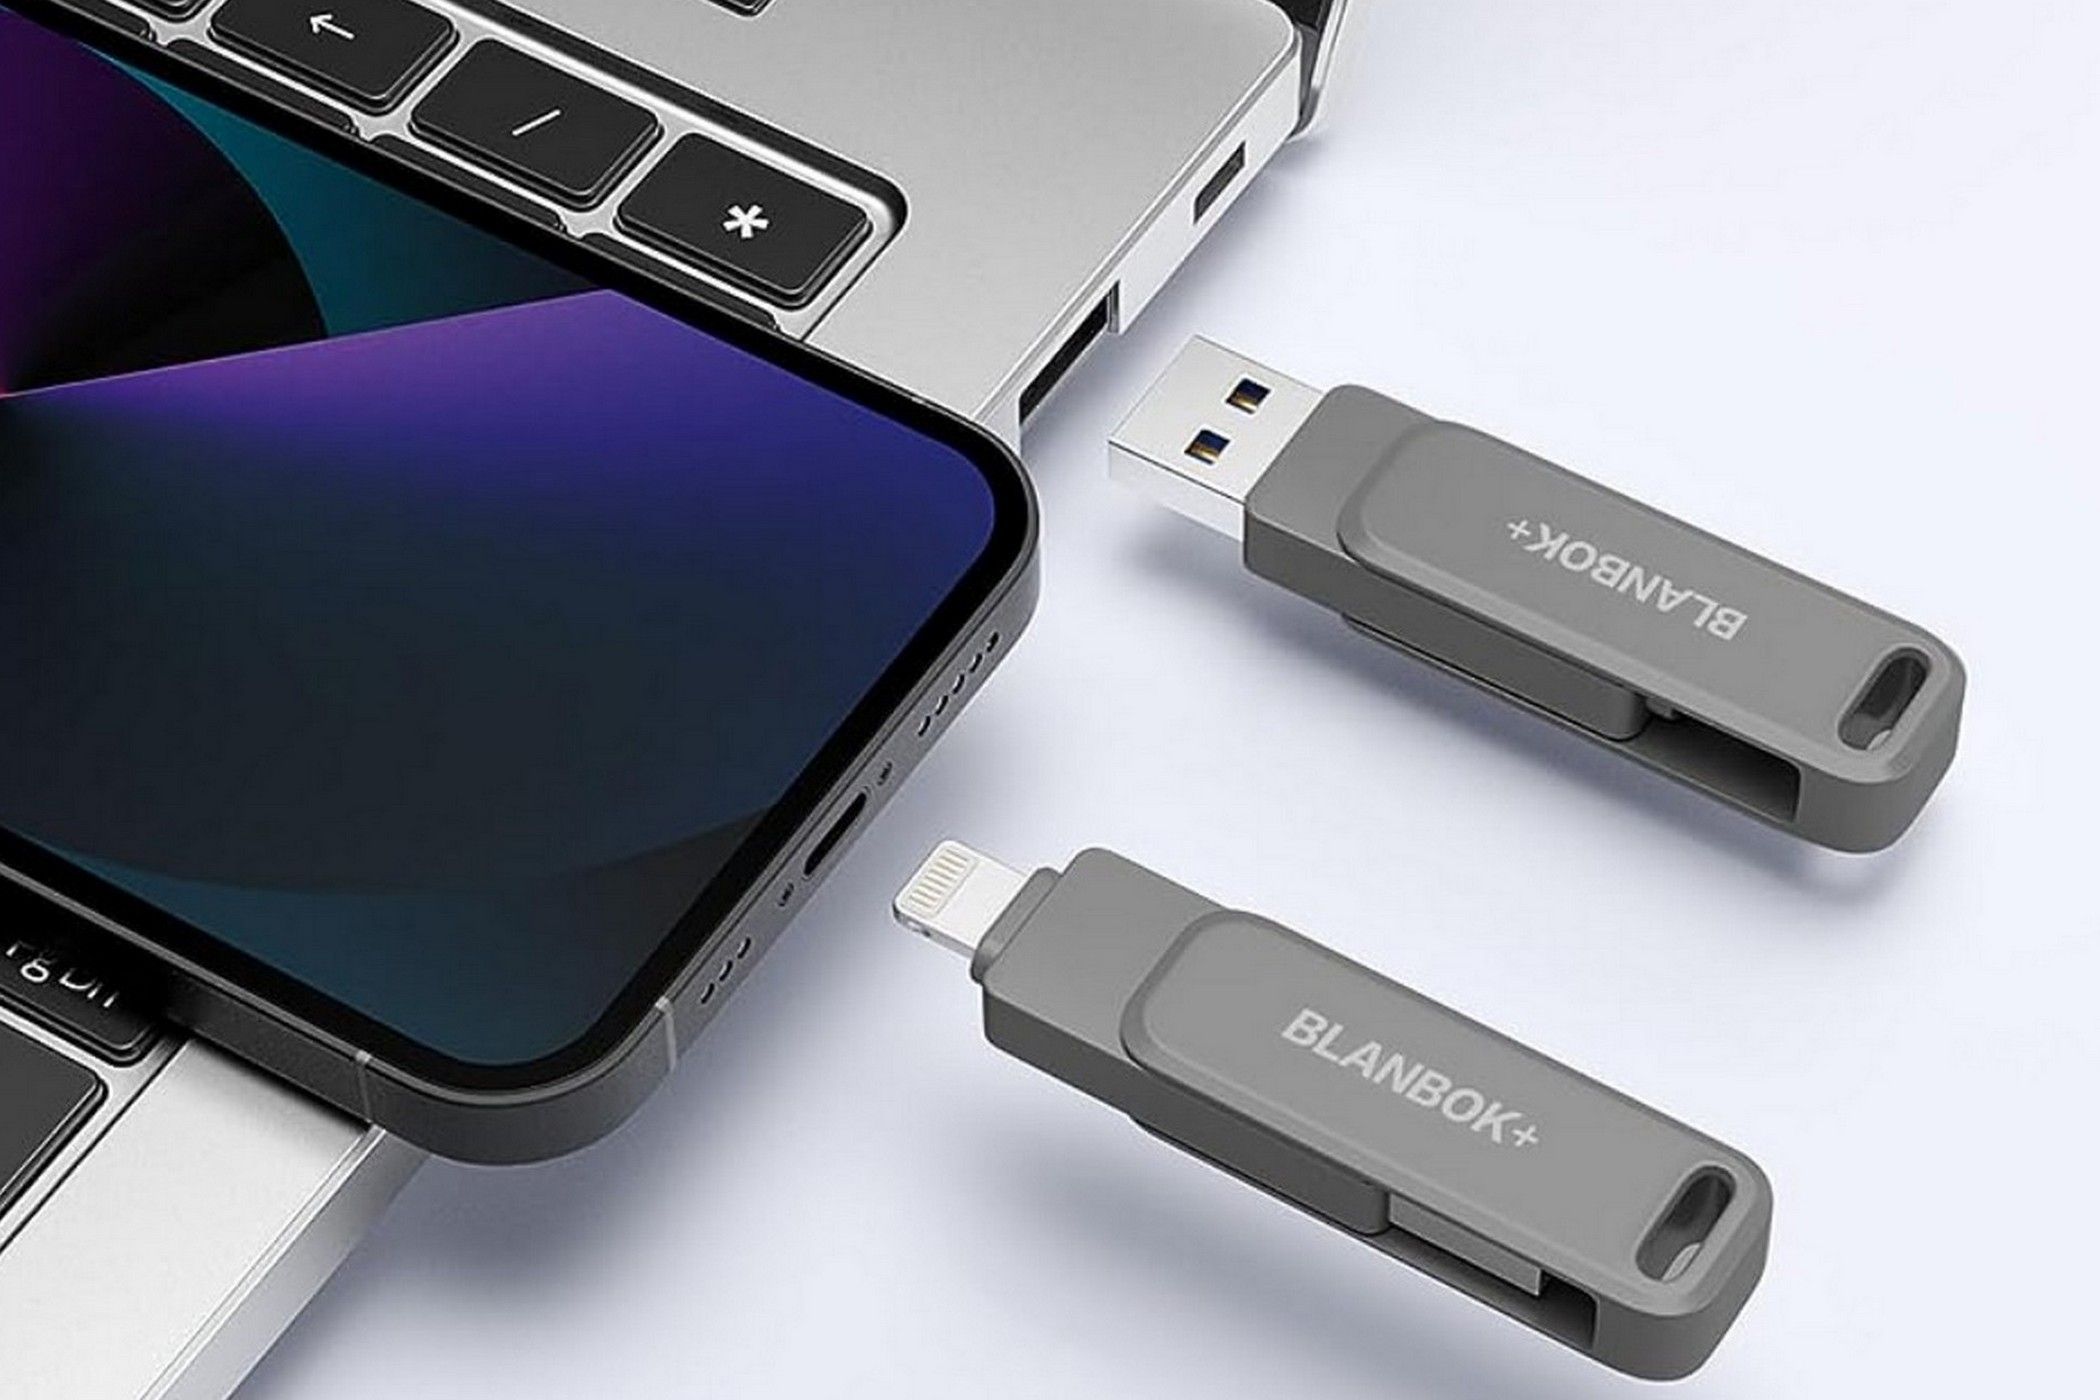 The best iPhone/iPad USB flash drives with Lightning connectors